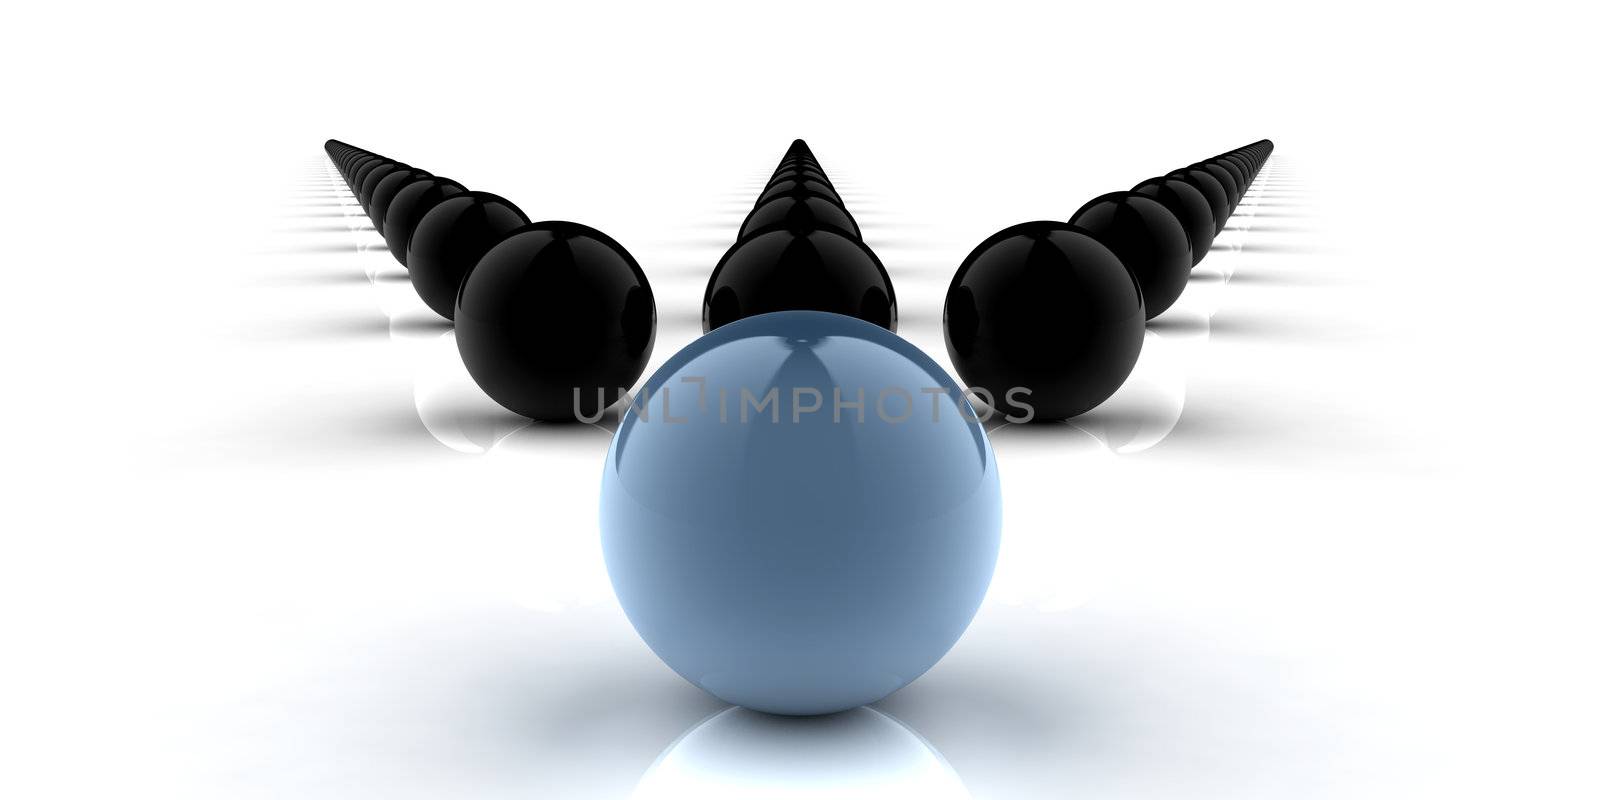 Two colored spheres as concept for leadership, teamwork